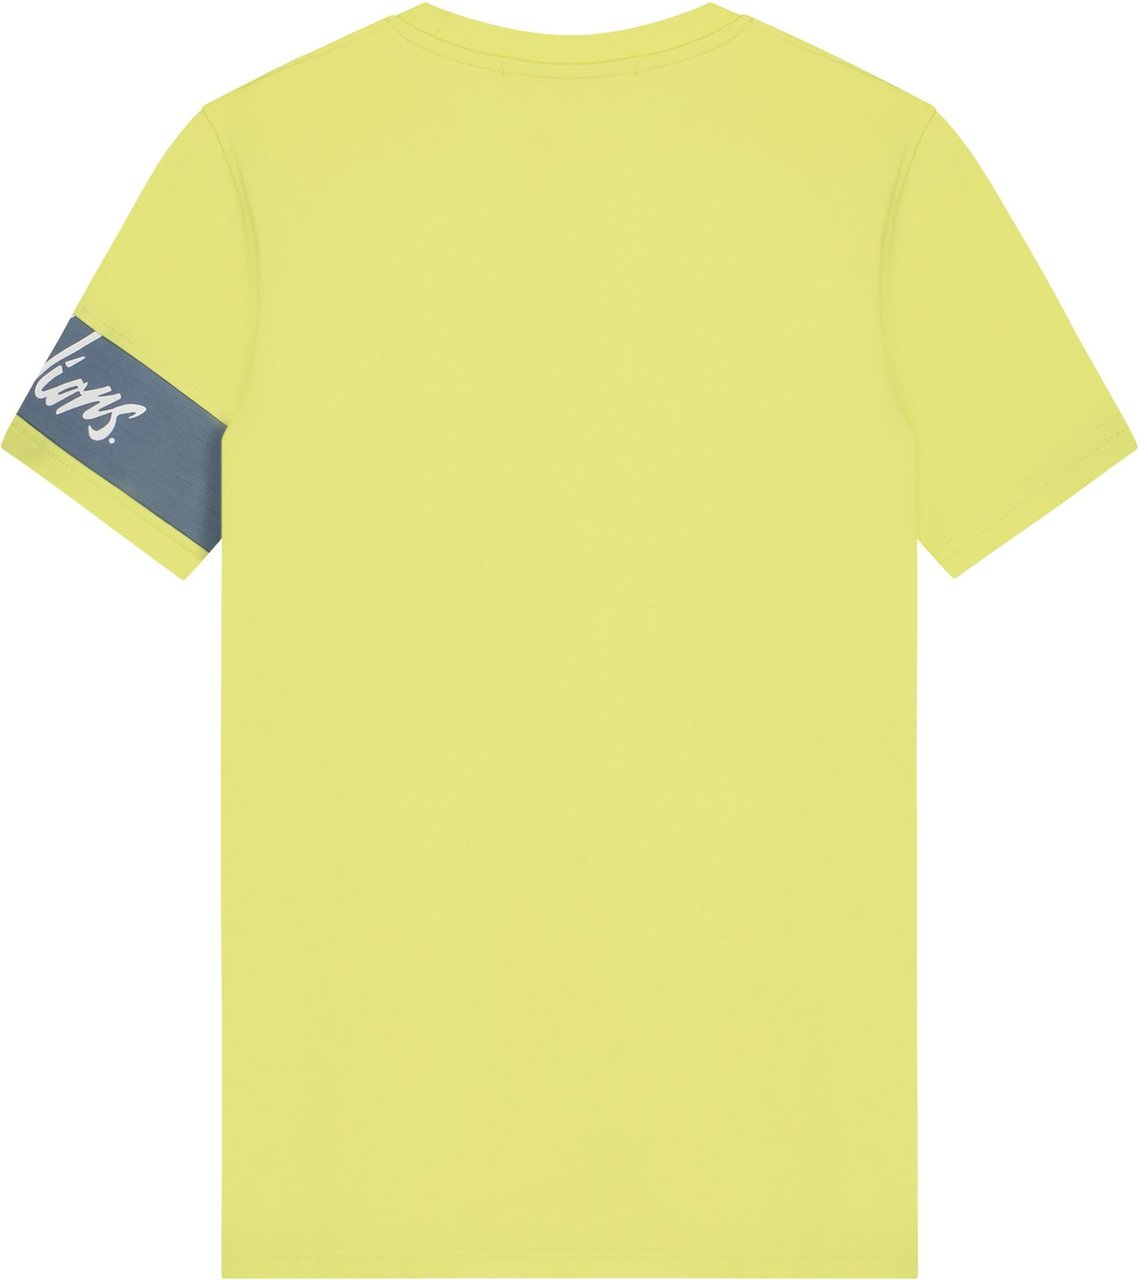 Malelions Captain T-Shirt - Lime Yellow